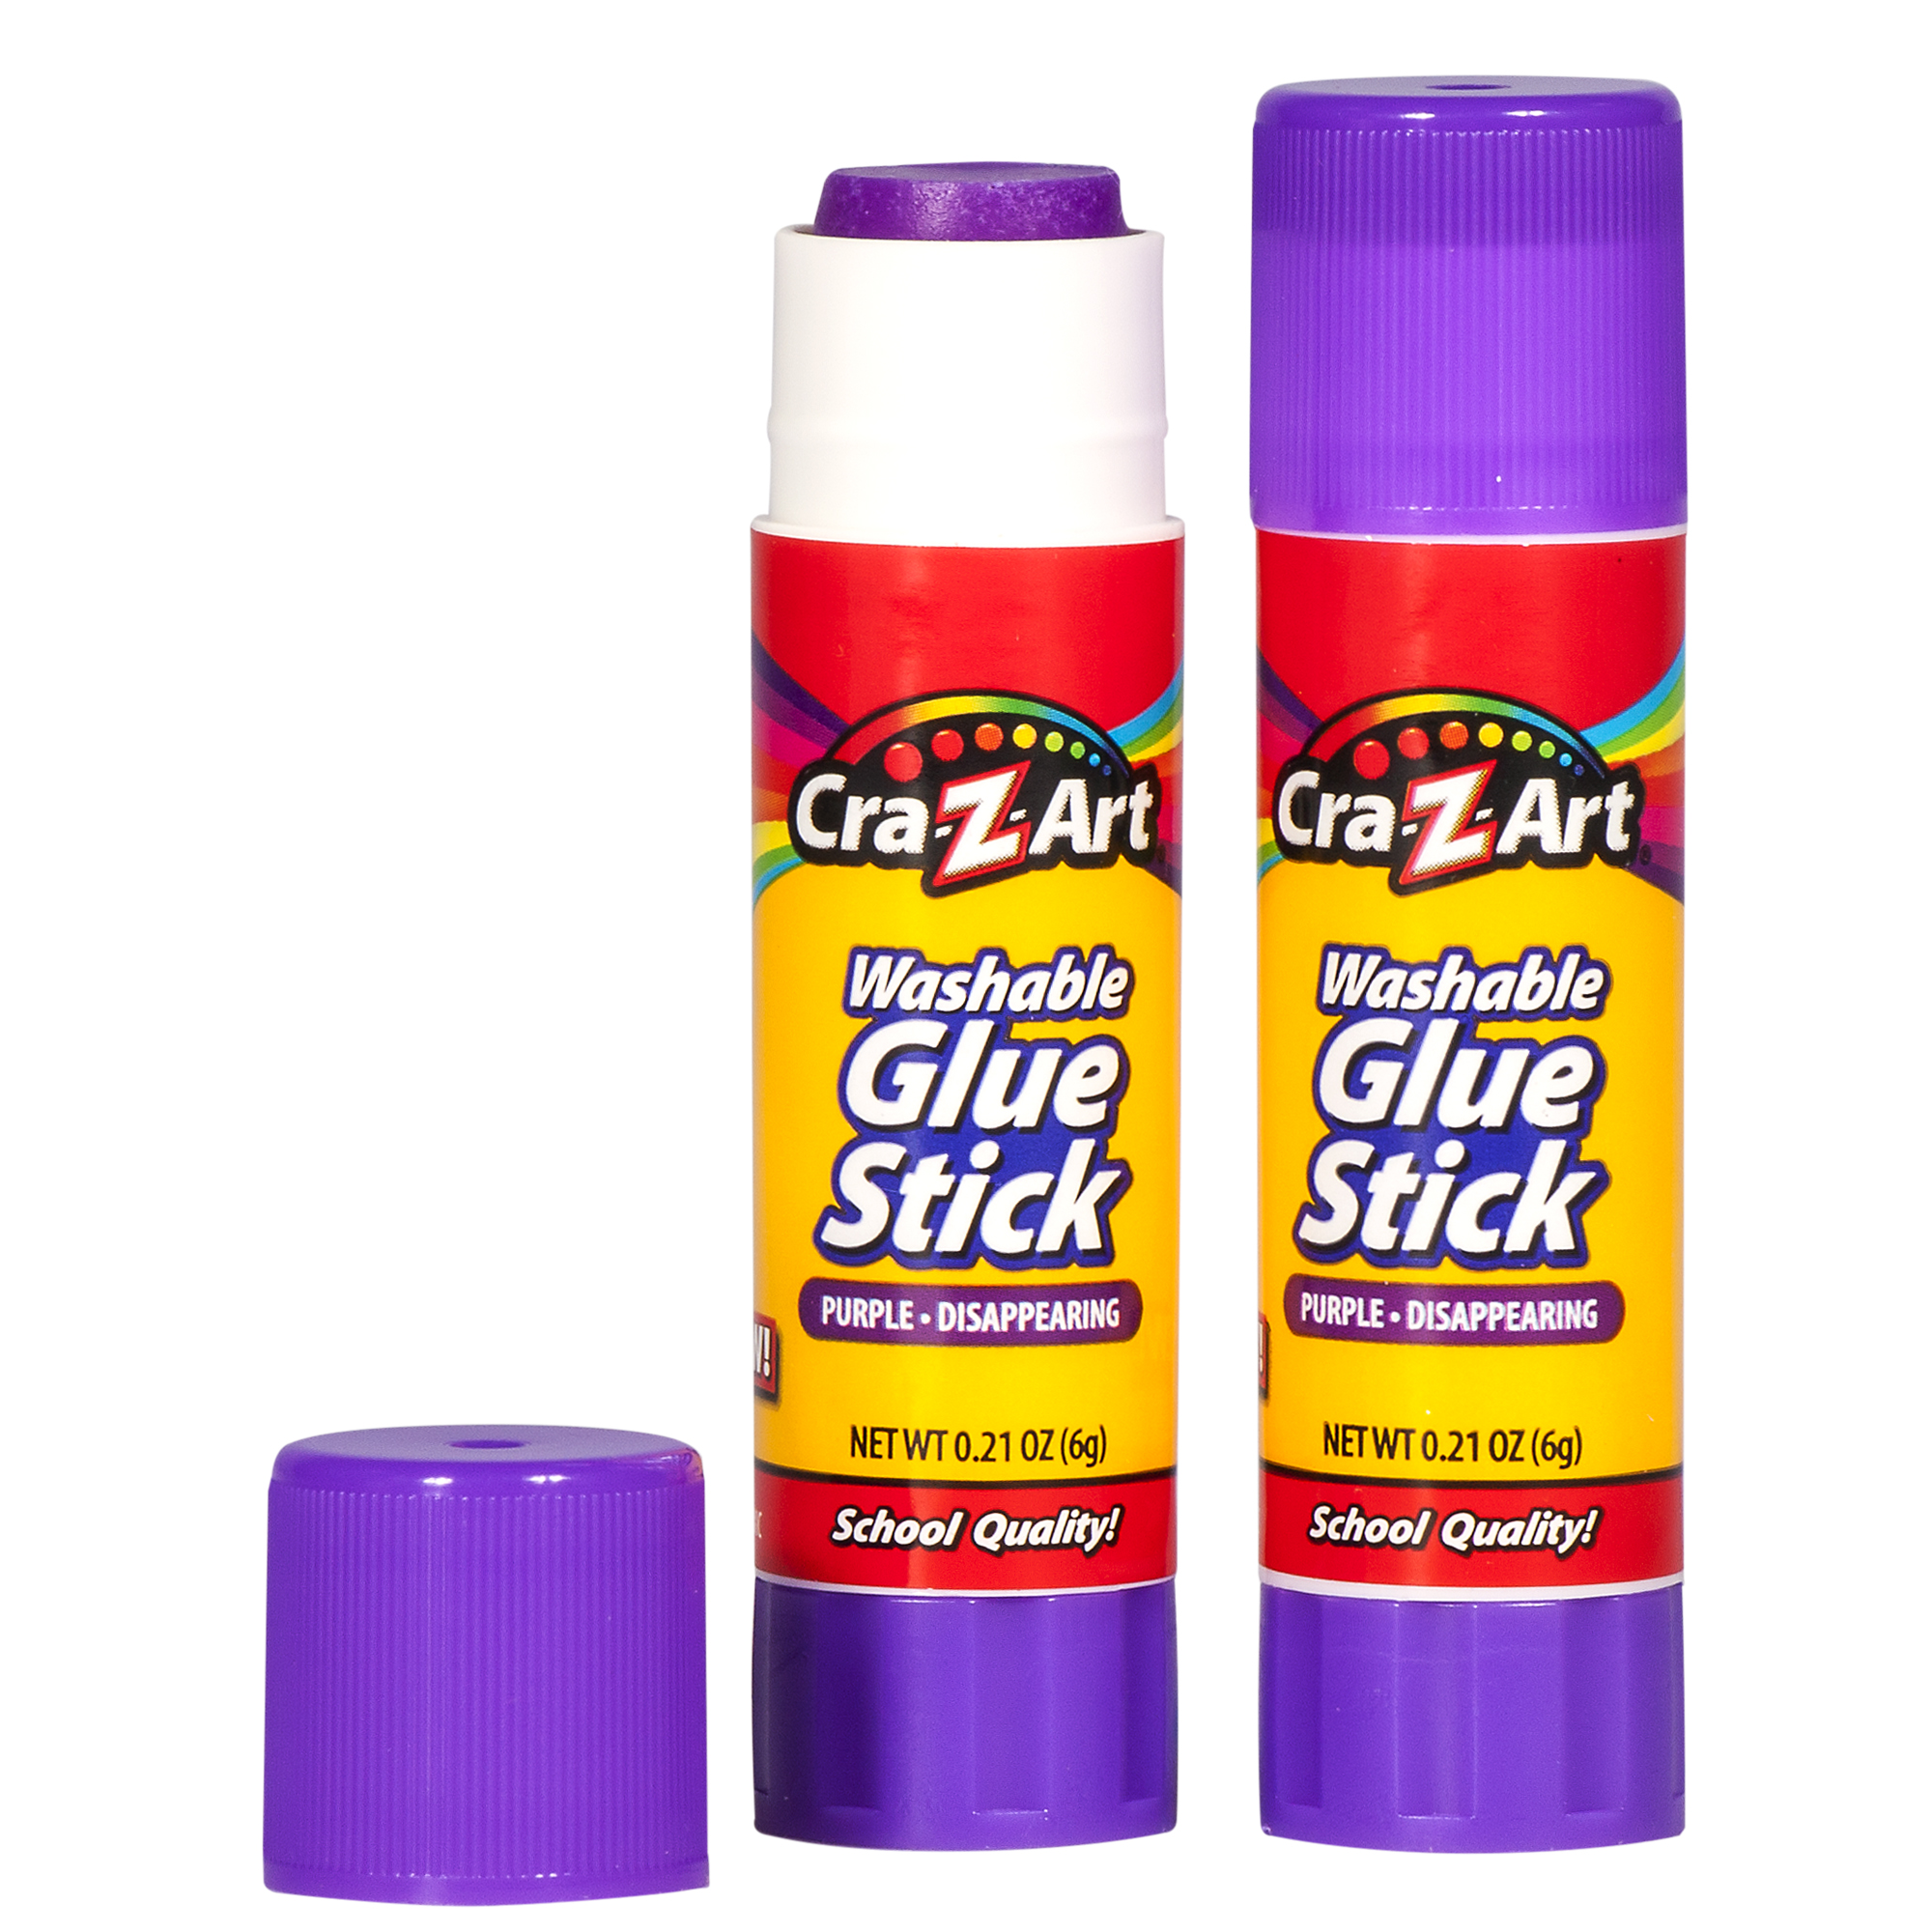 Cra-Z-Art Washable Glue Sticks, Disappearing Purple, 2 Count, 1.5oz - image 5 of 10